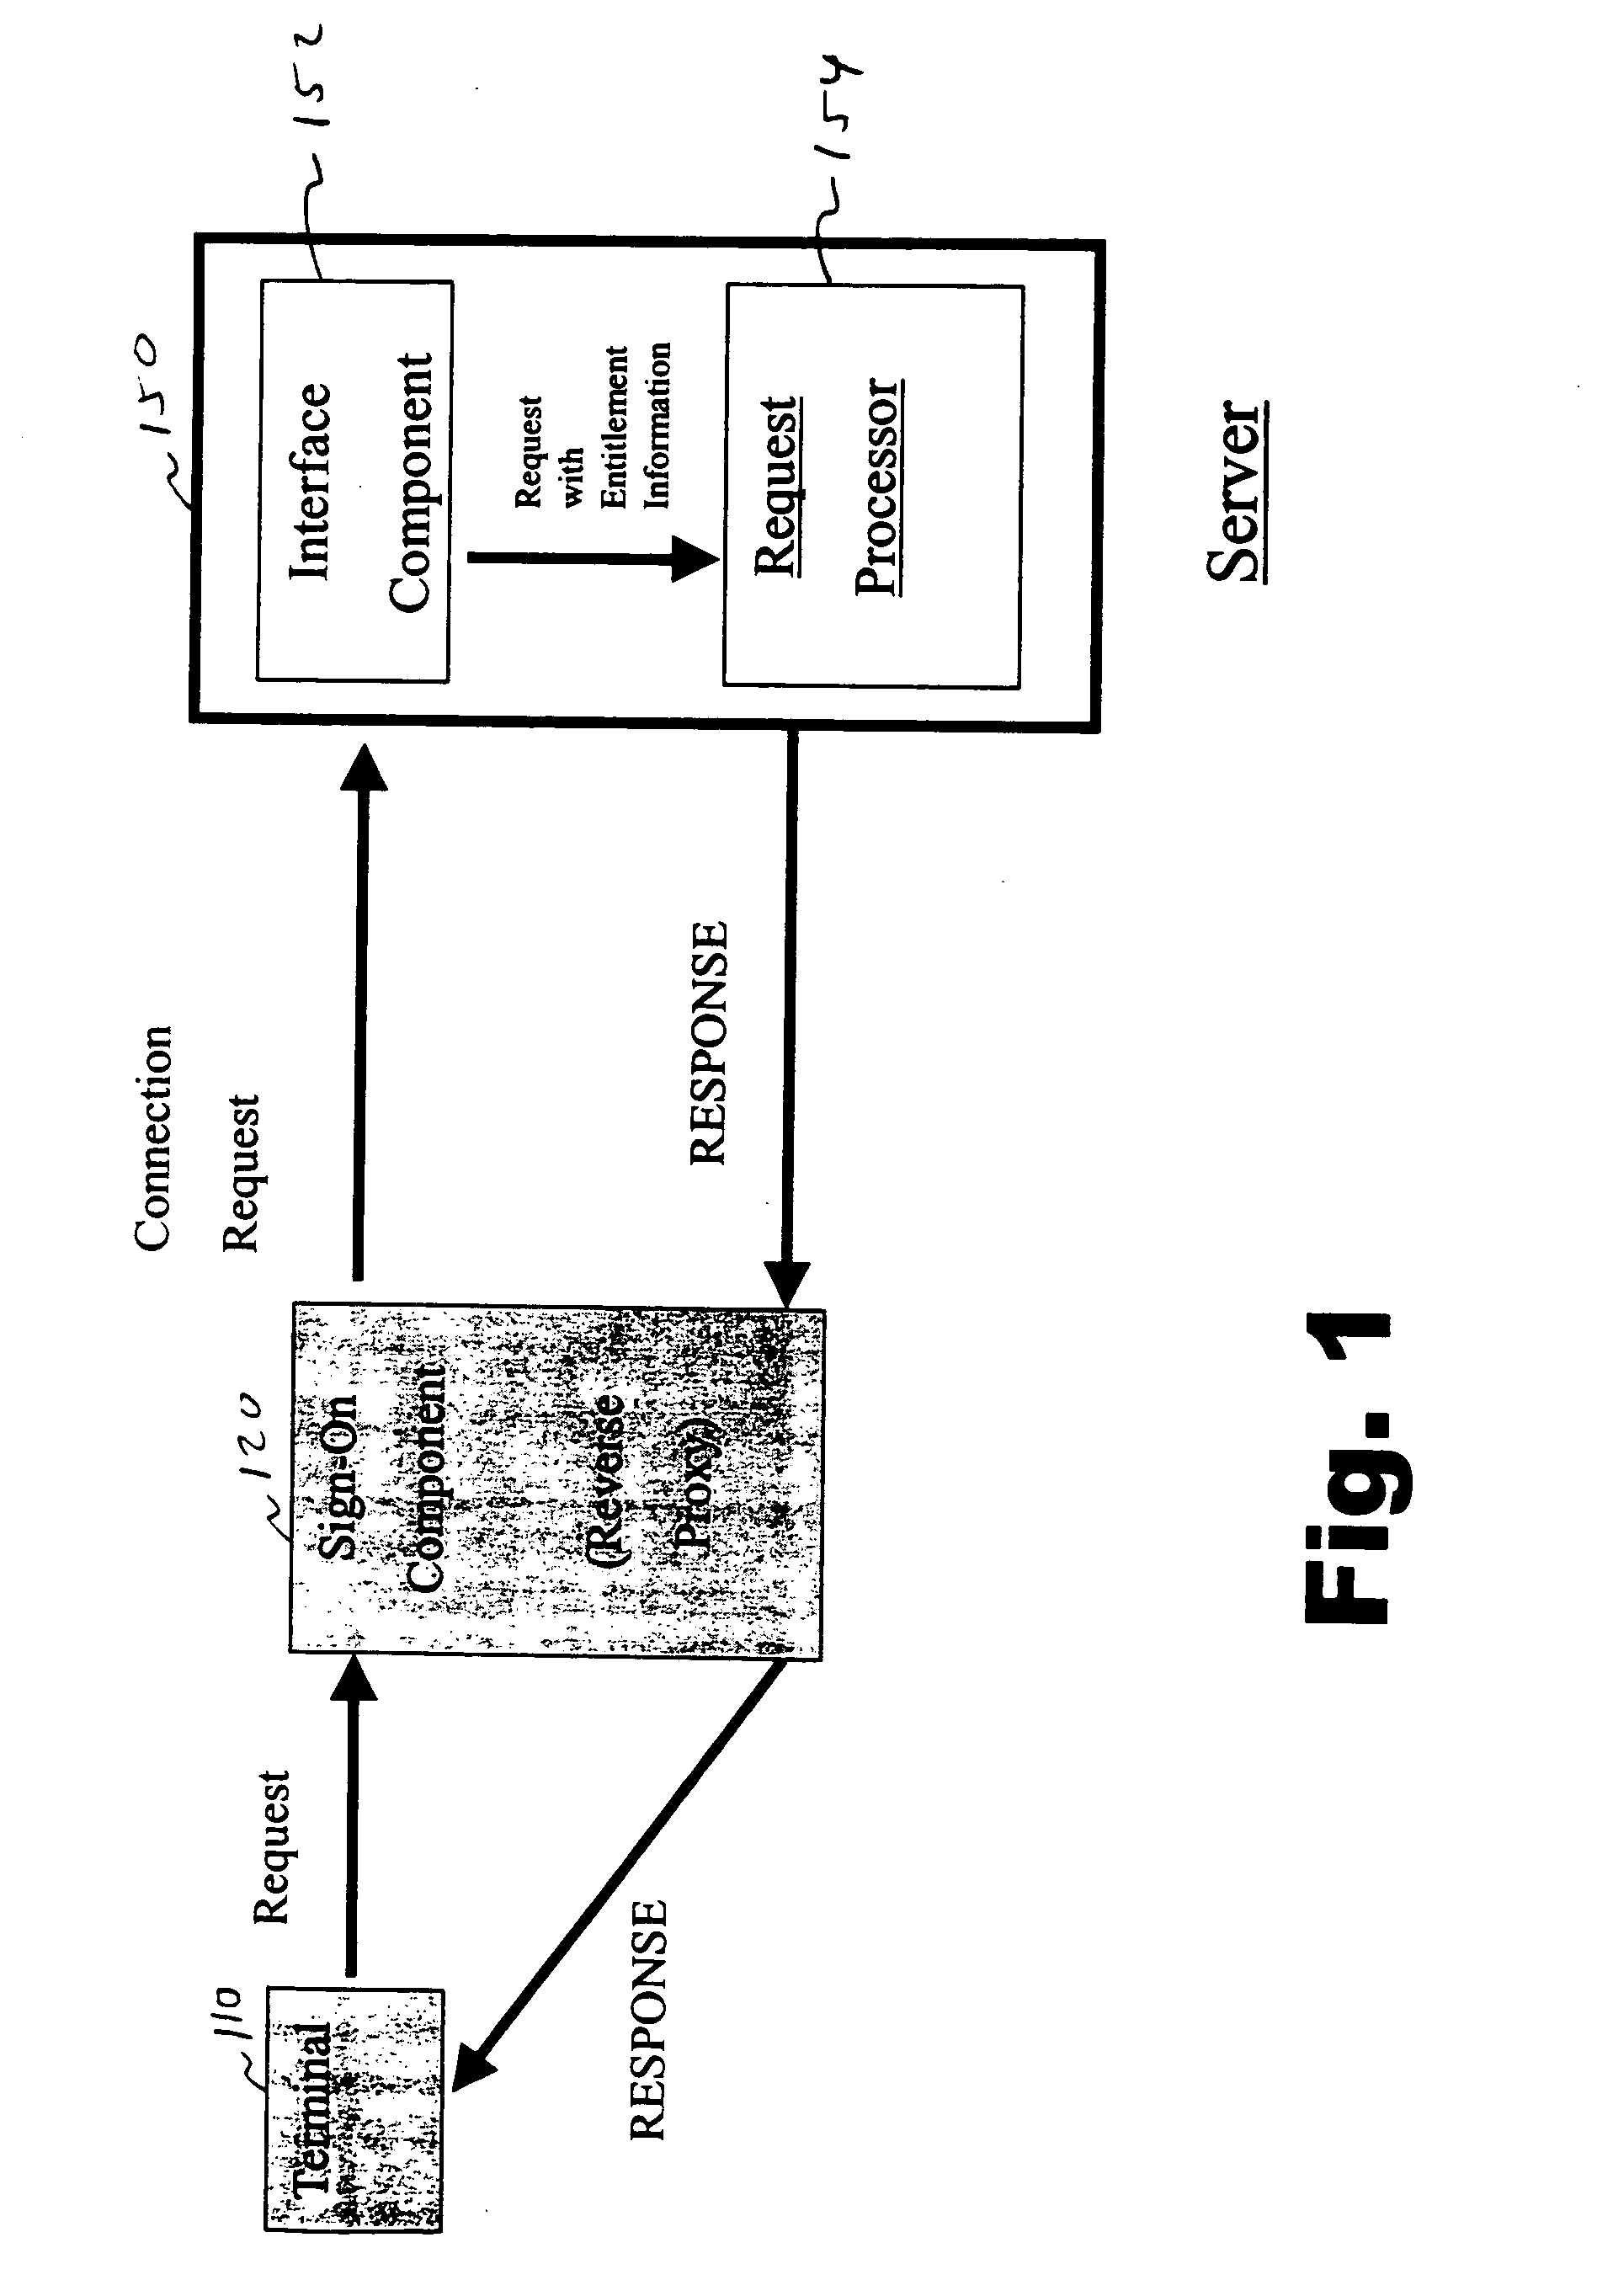 Single sign-on authentication system